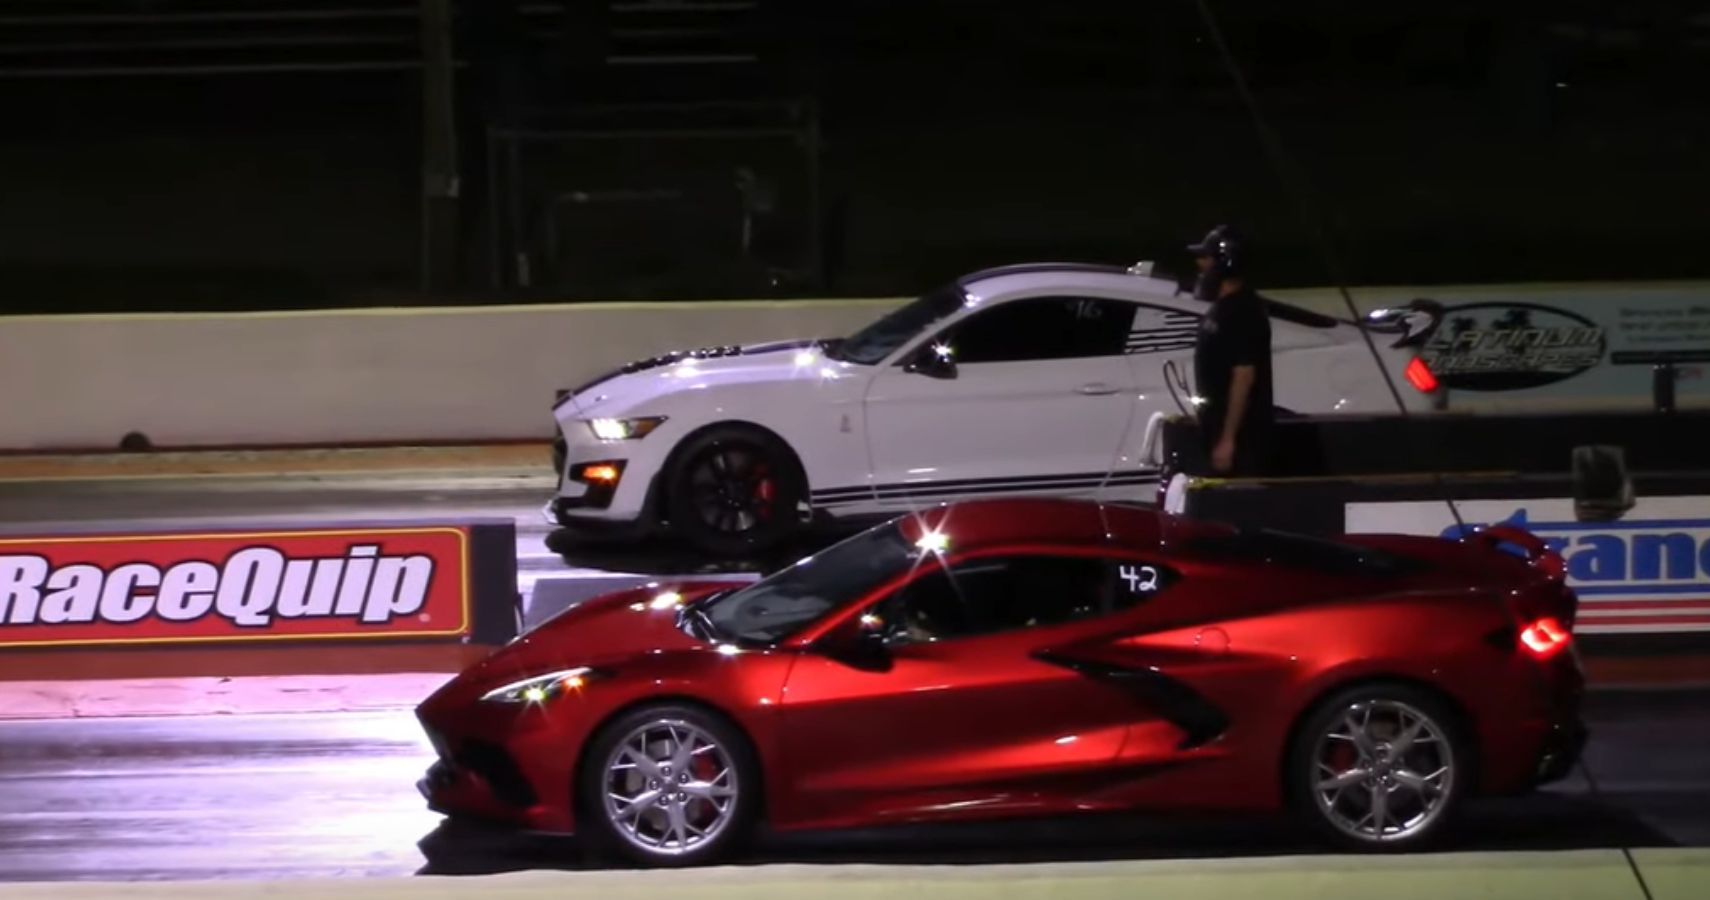 Ford Mustang Shelby GT500 Shows A C8 Chevrolet Corvette Why It's The King